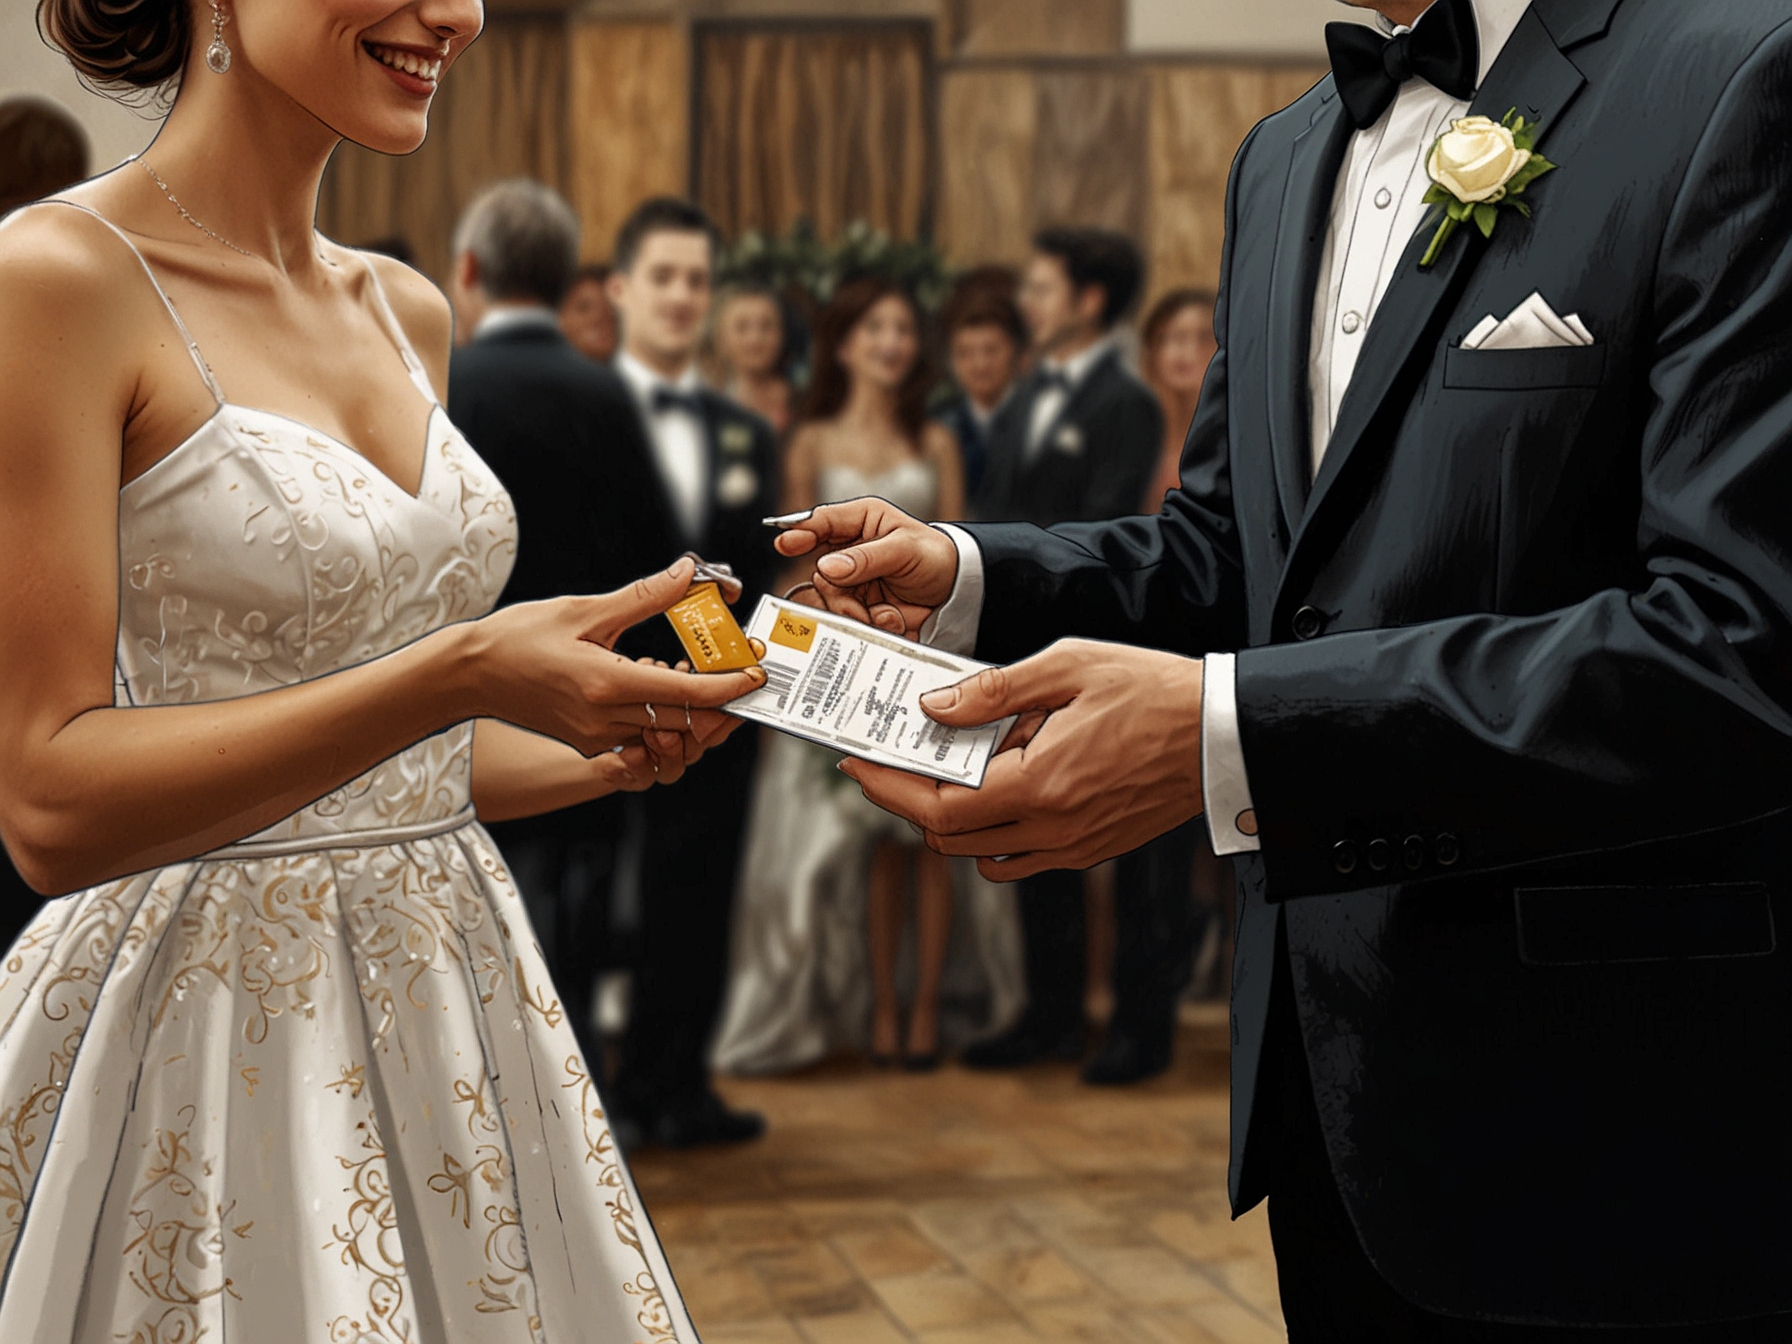 Close-up of drink tickets being handed out at a wedding entrance, symbolizing the debate surrounding the bride's decision to manage drinking and ensure guest safety.